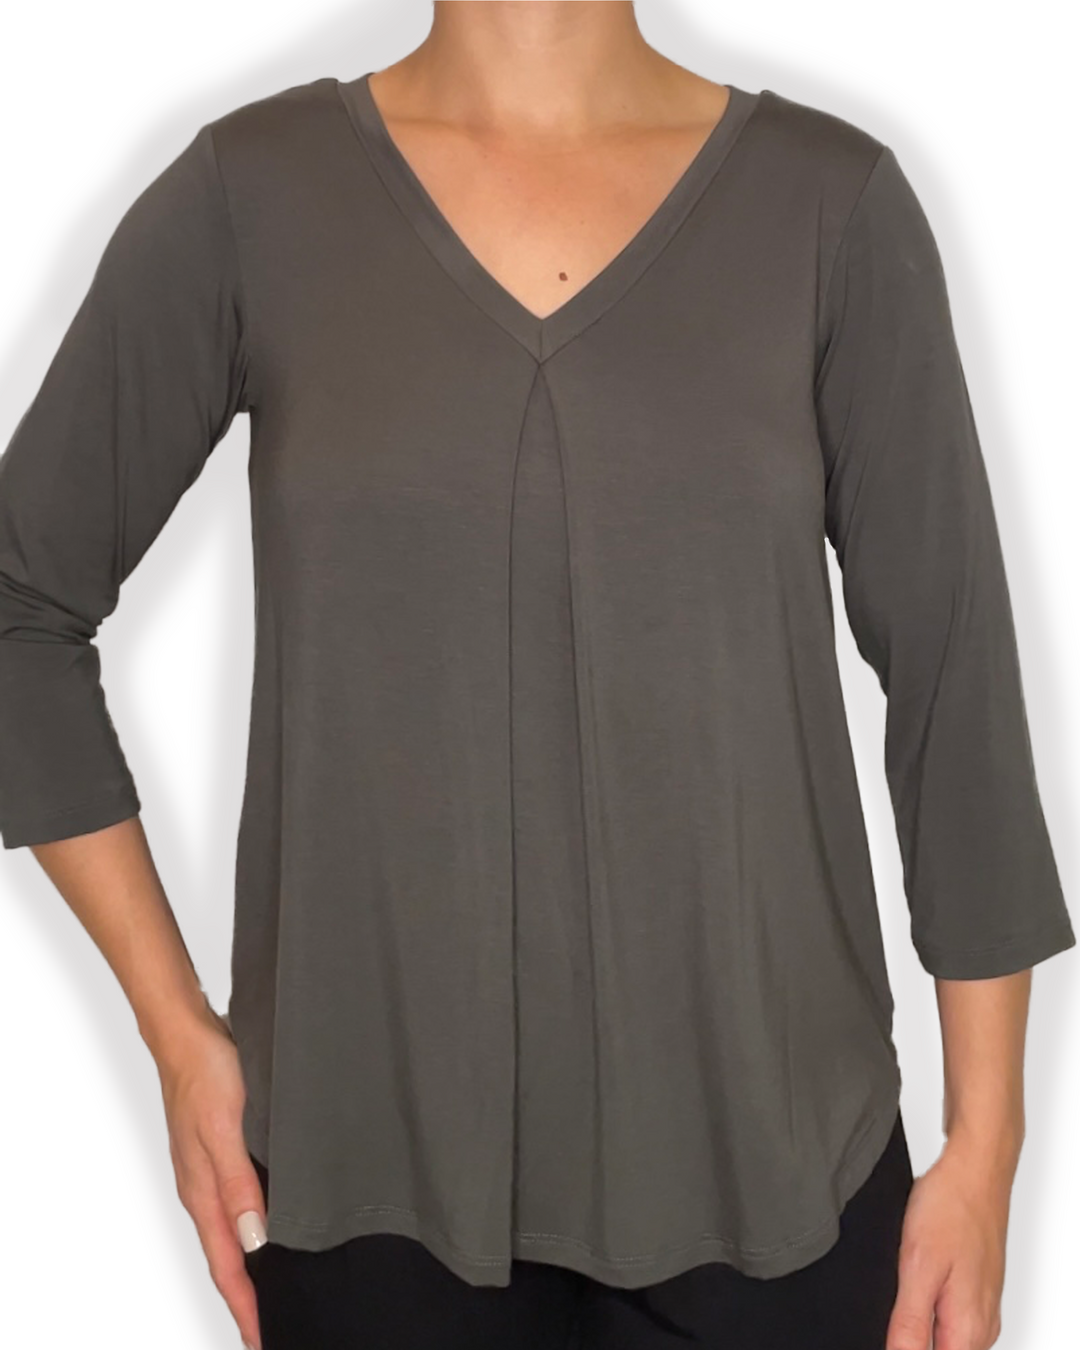 EILEEN Braless Bamboo 3/4 Sleeve Top with center inverted pleat design in olive color front view